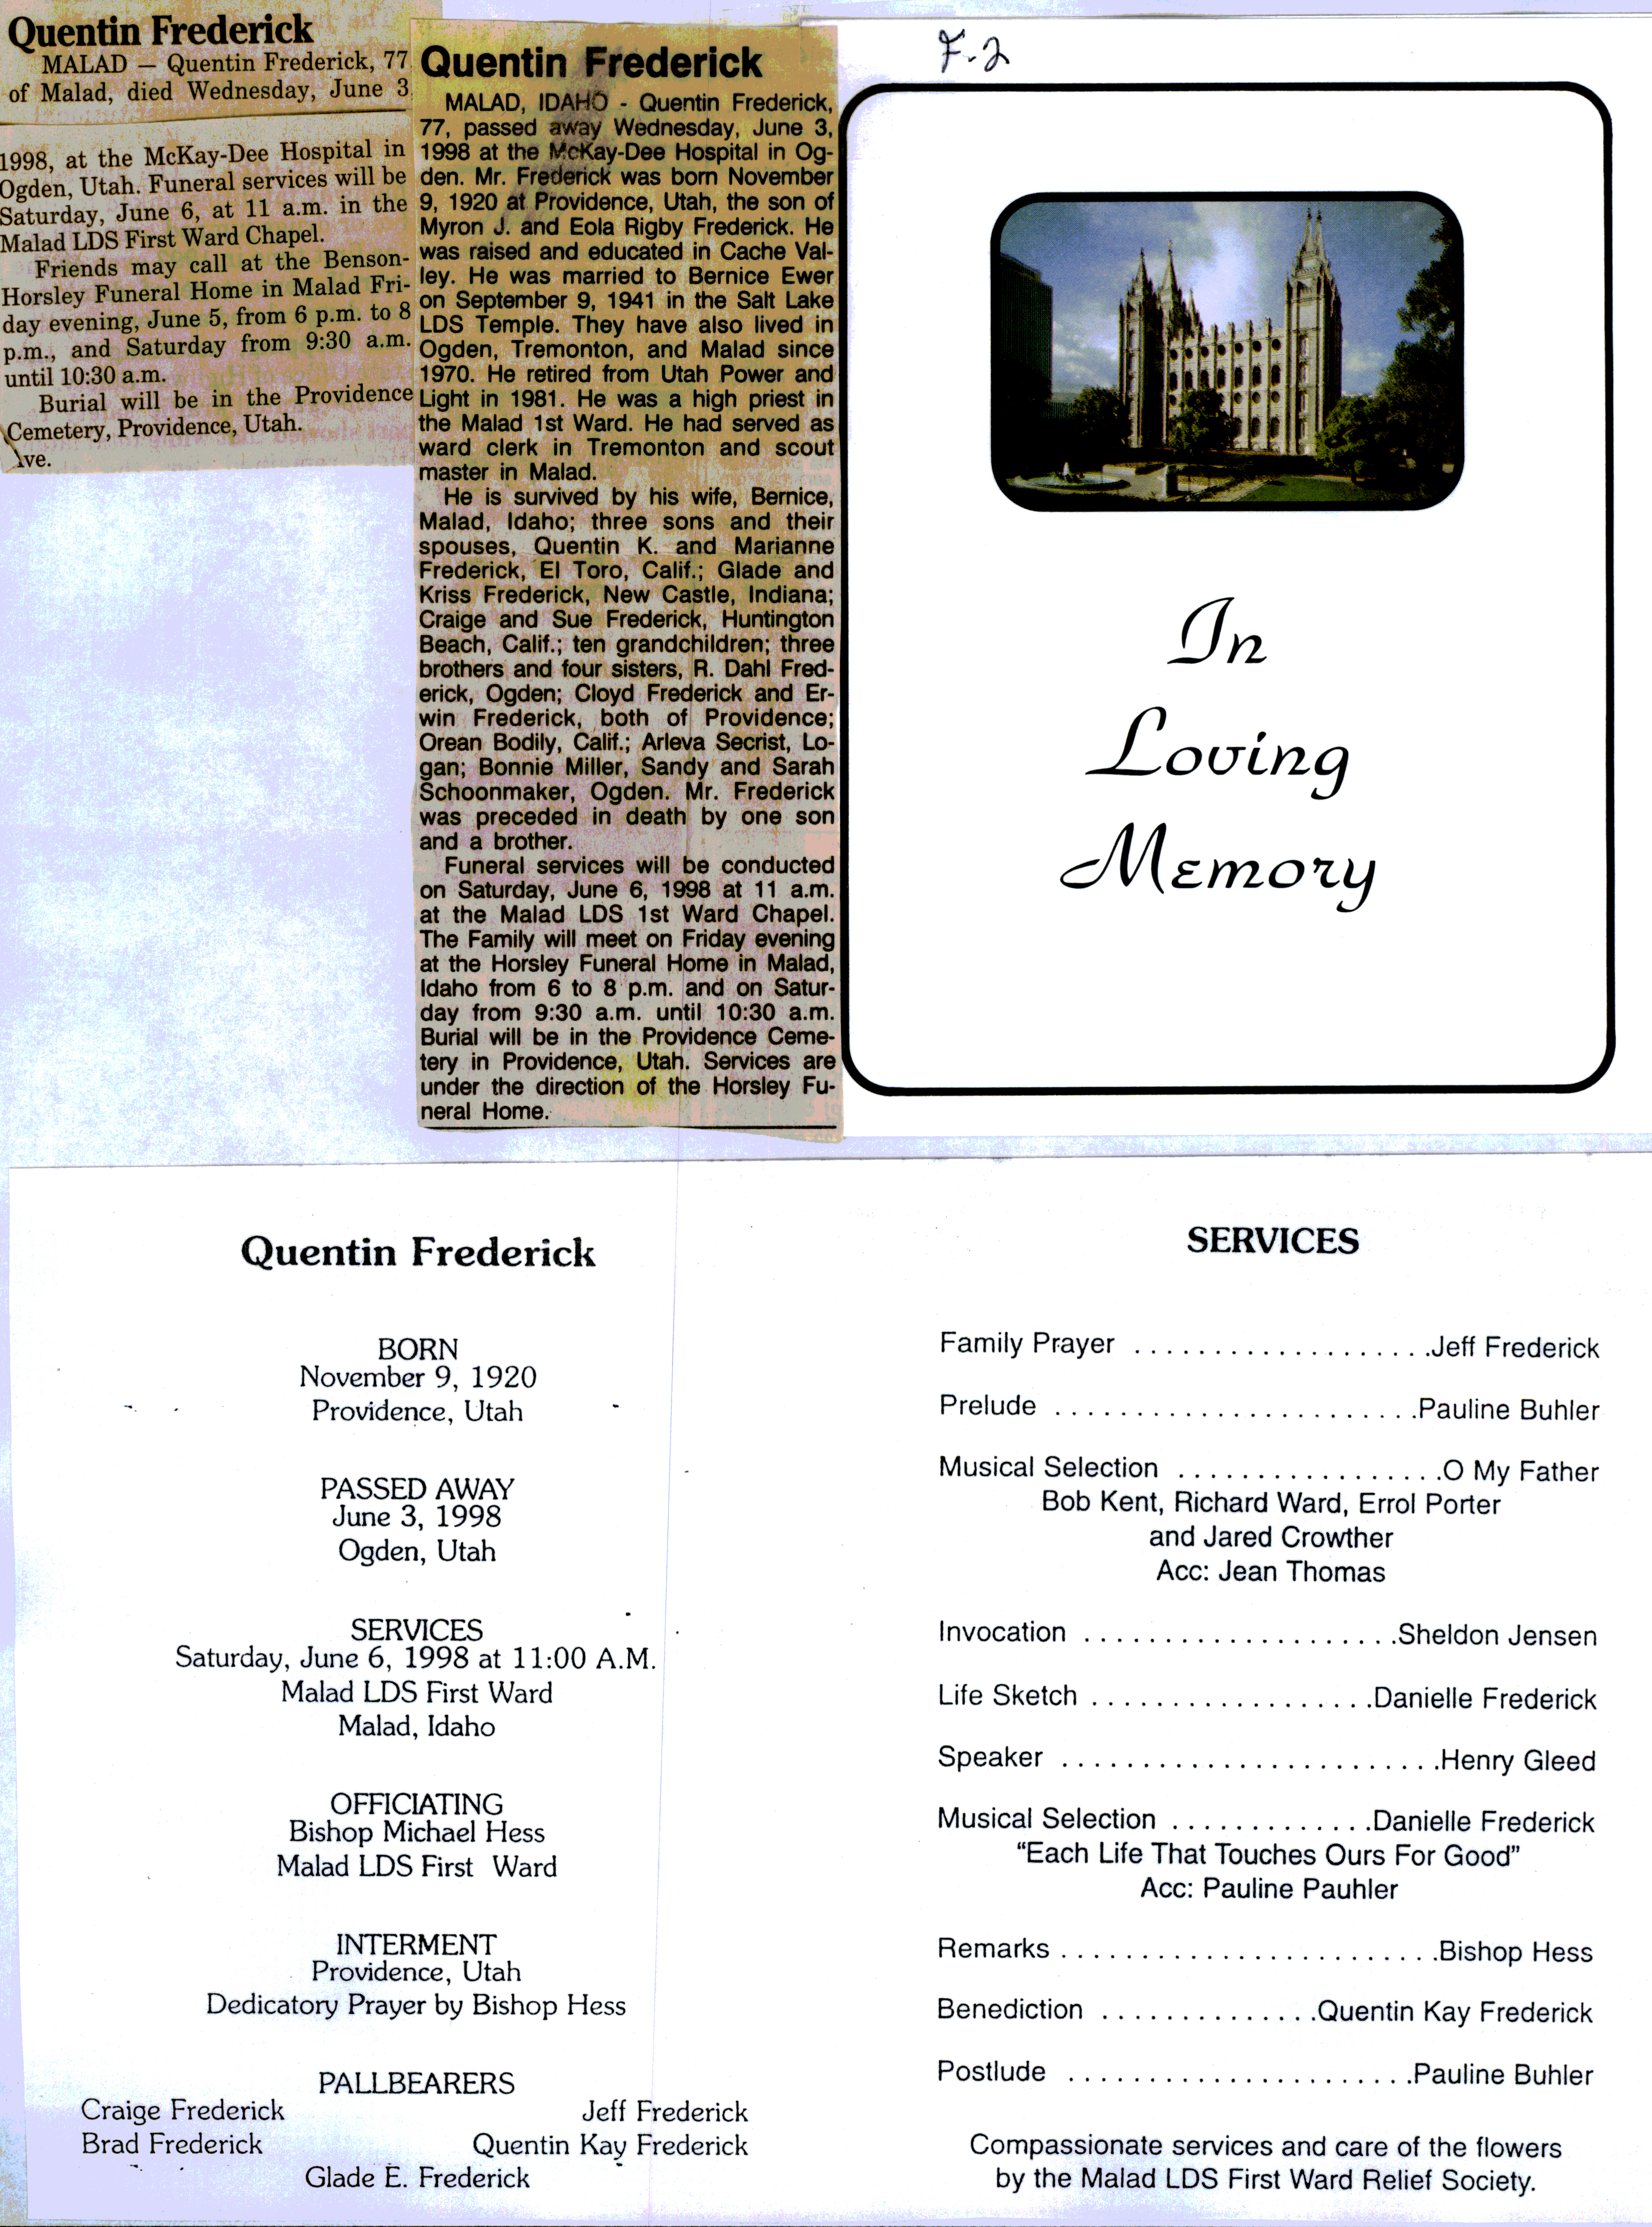 Quentin Frederick obit and program